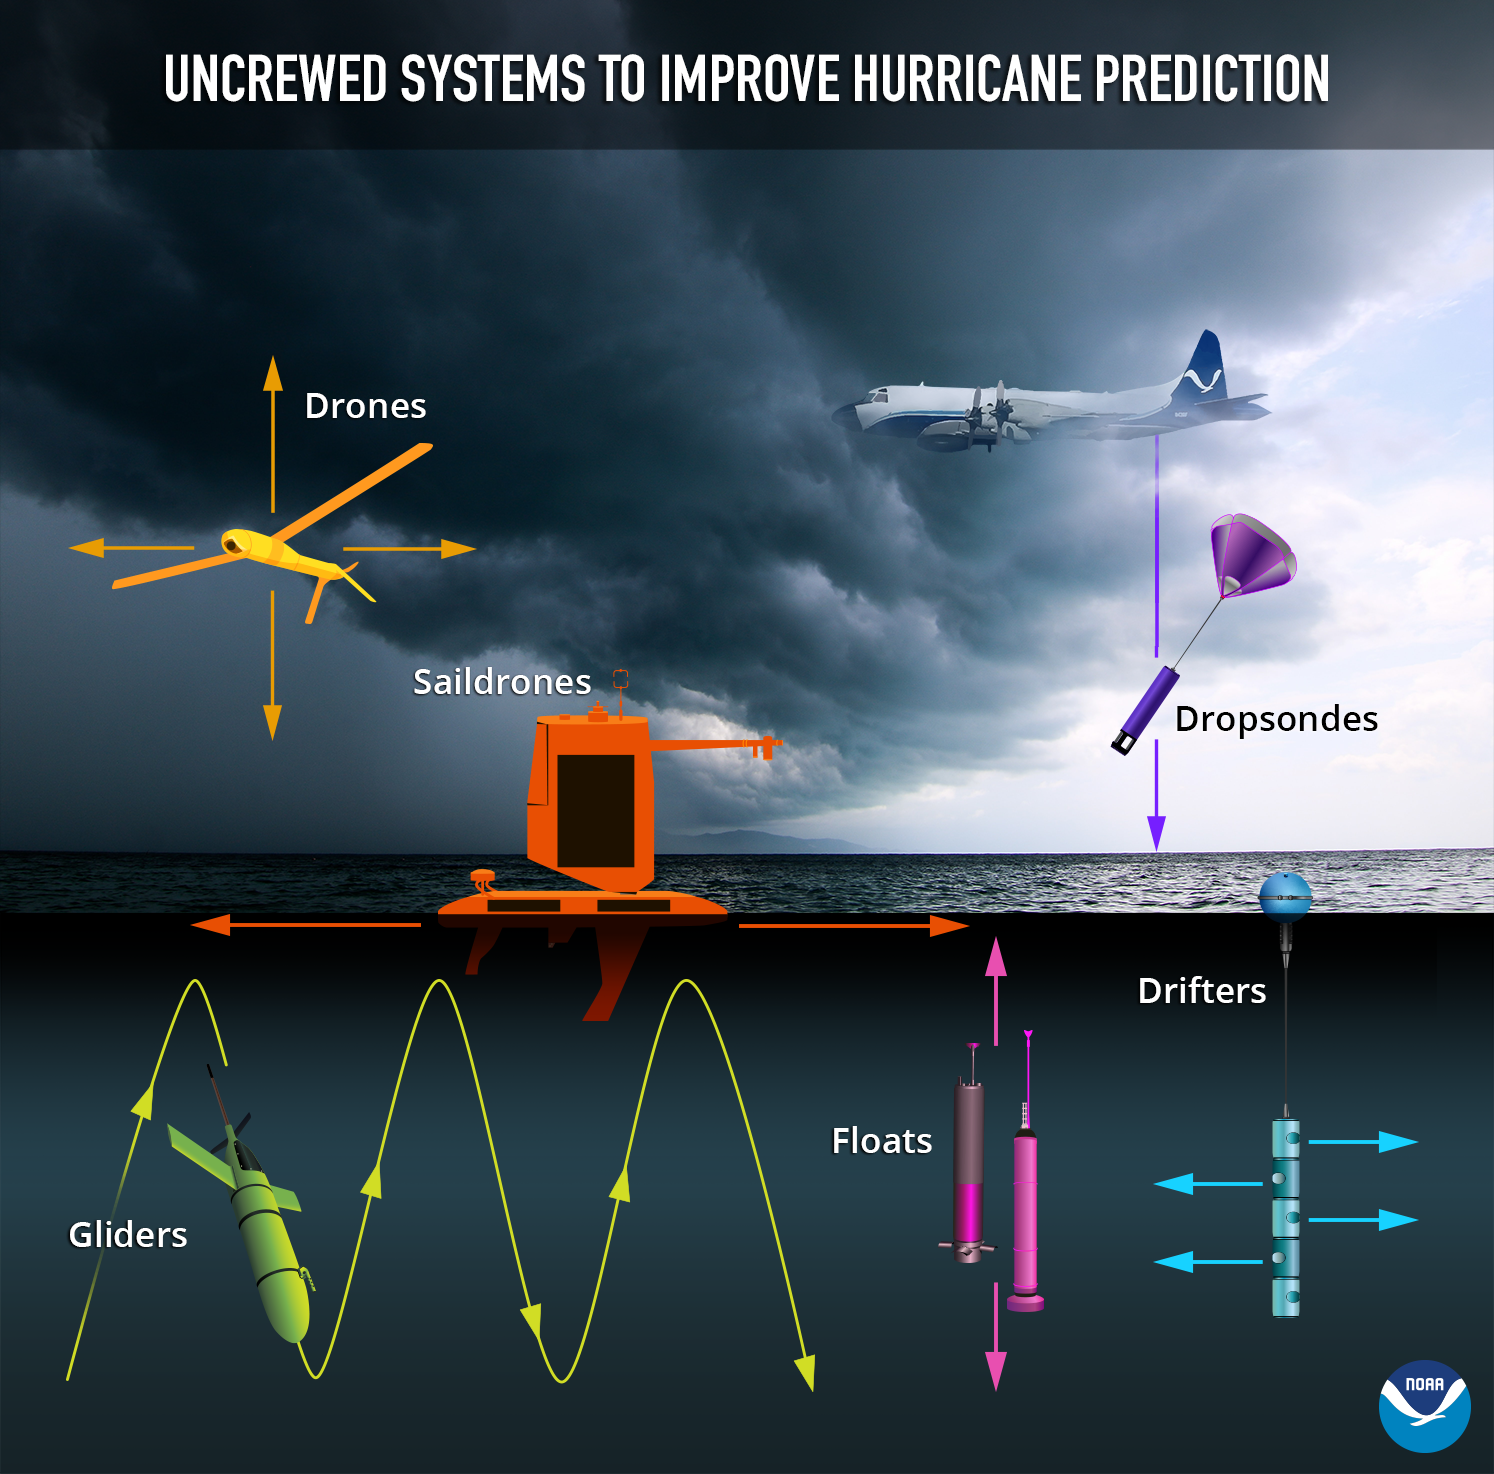 Various uncrewed systems used to improve hurricane prediction